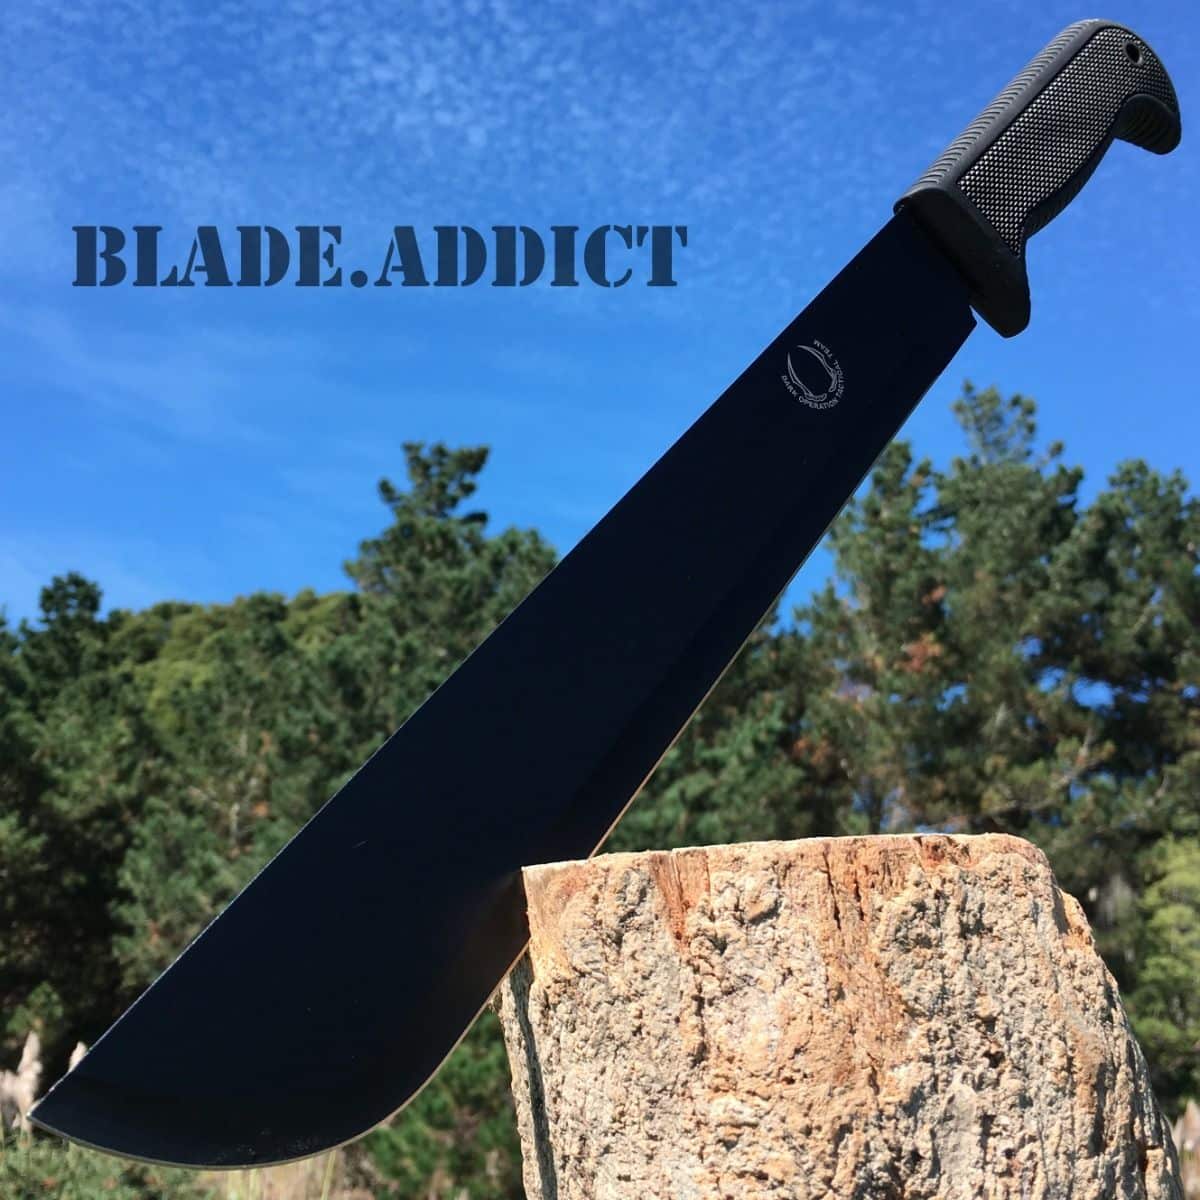 10.5" Stainless Steel Survival Skinning Hunting Knife Wood Bowie Camping